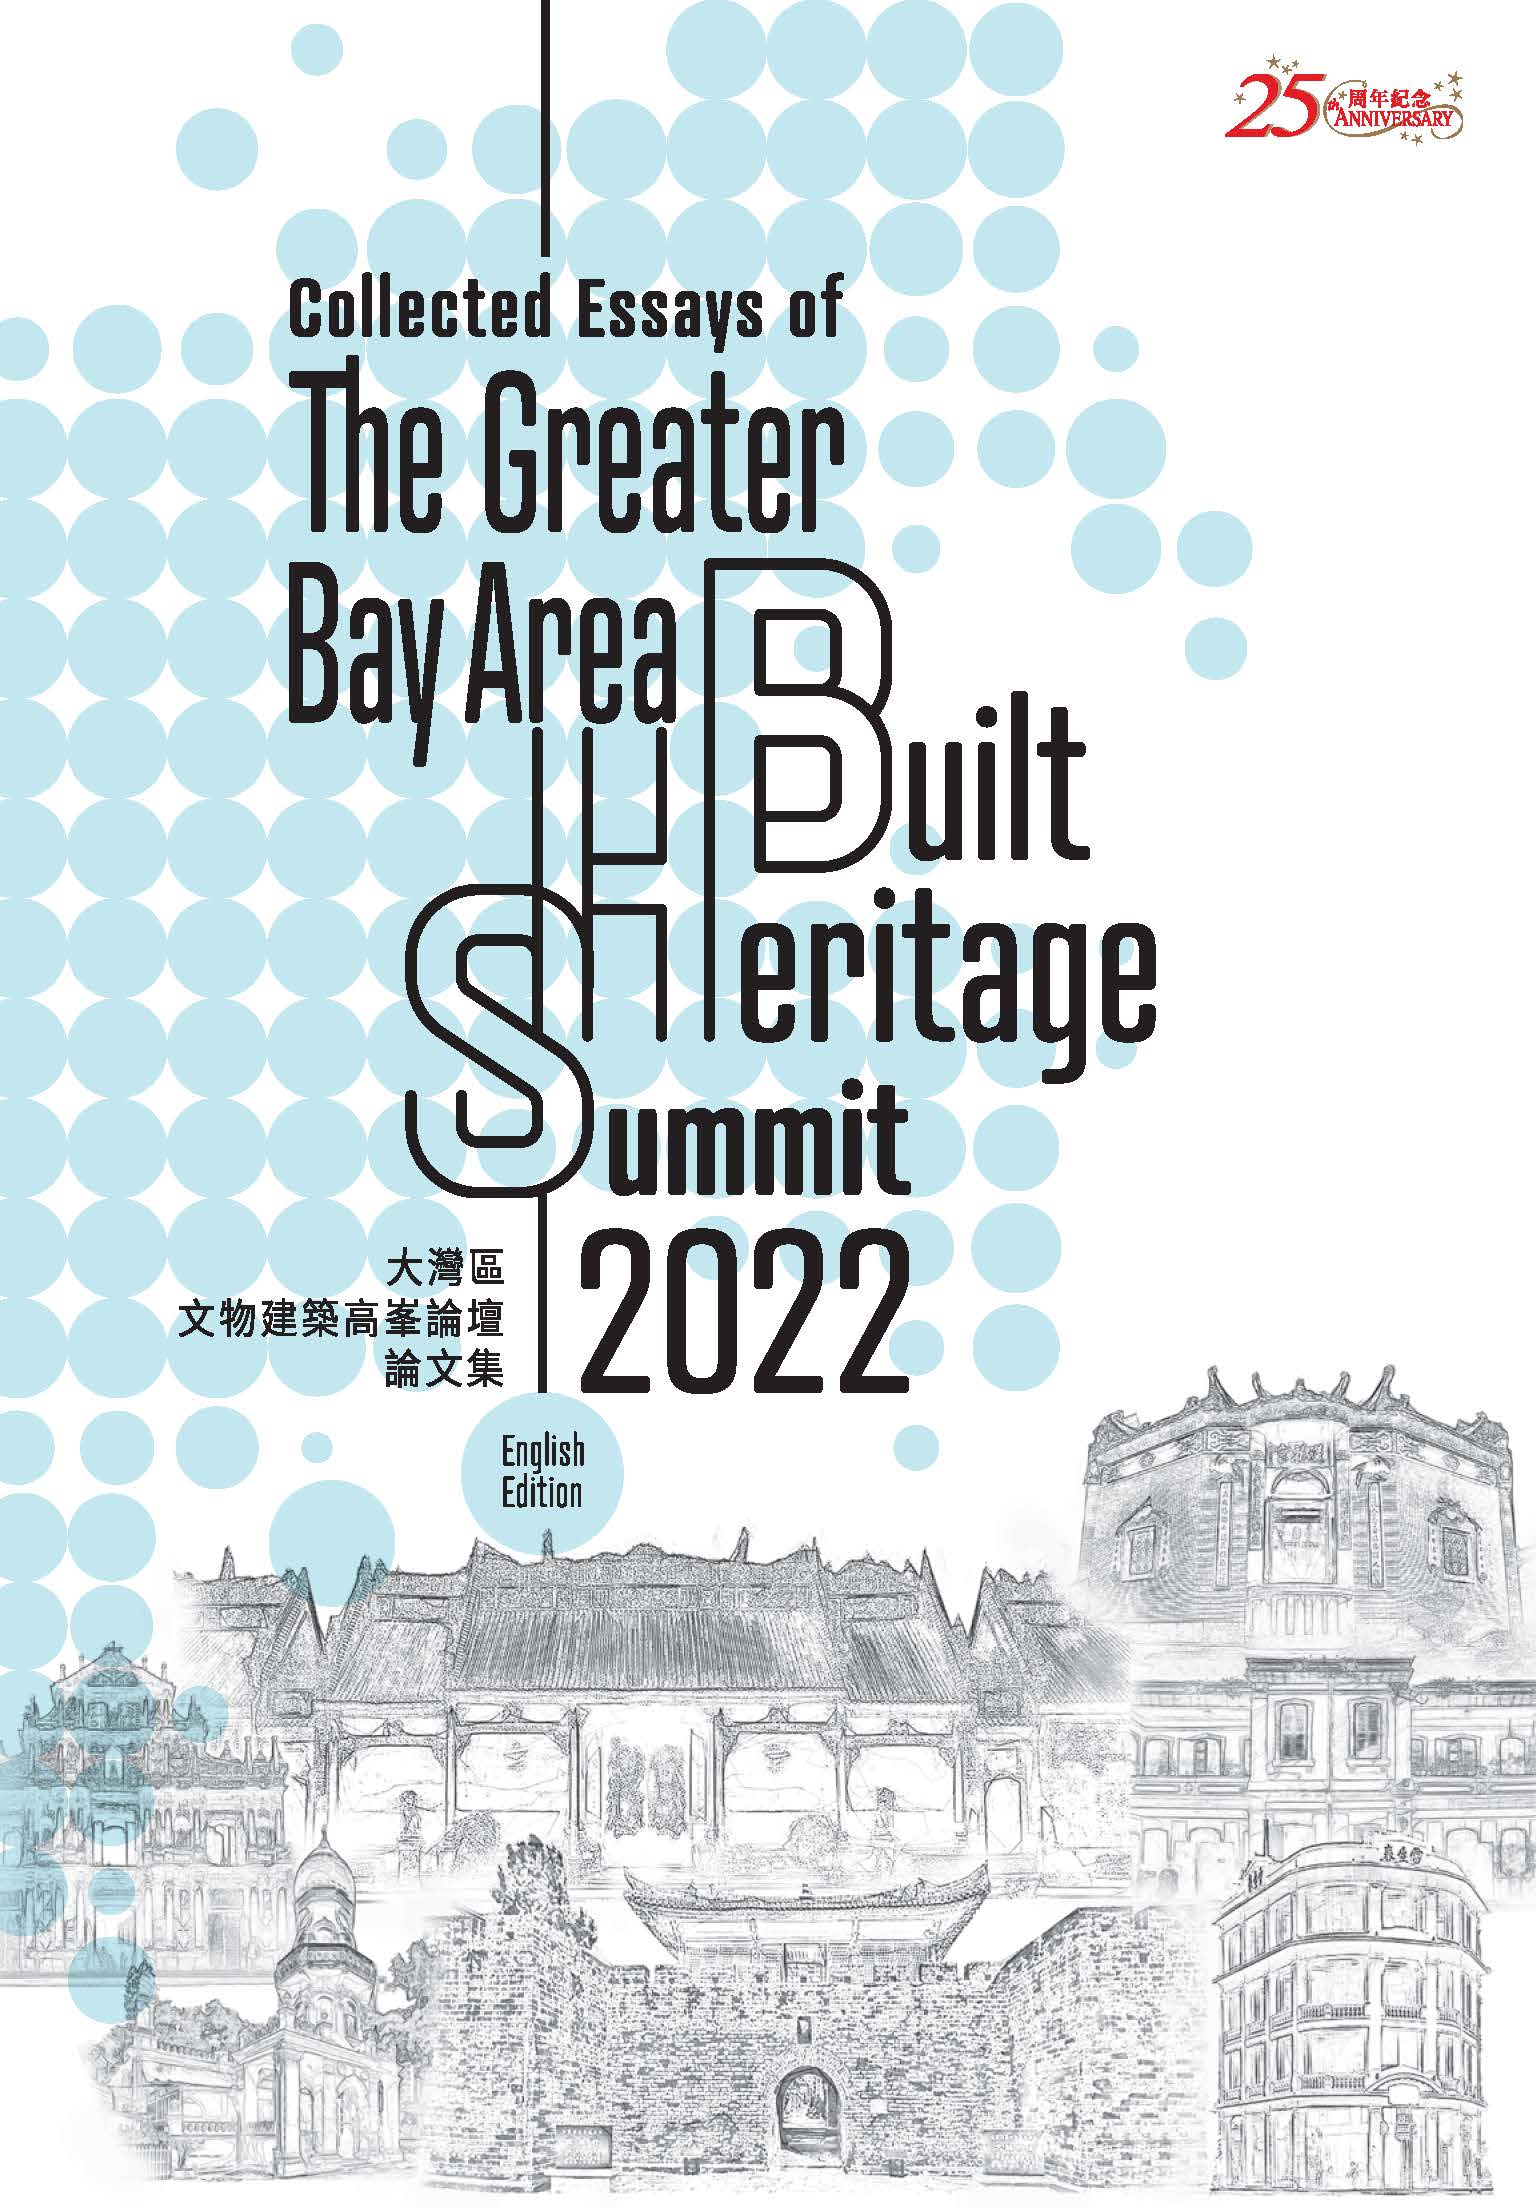 Collected essays of the “Greater Bay Area Built Heritage Summit”